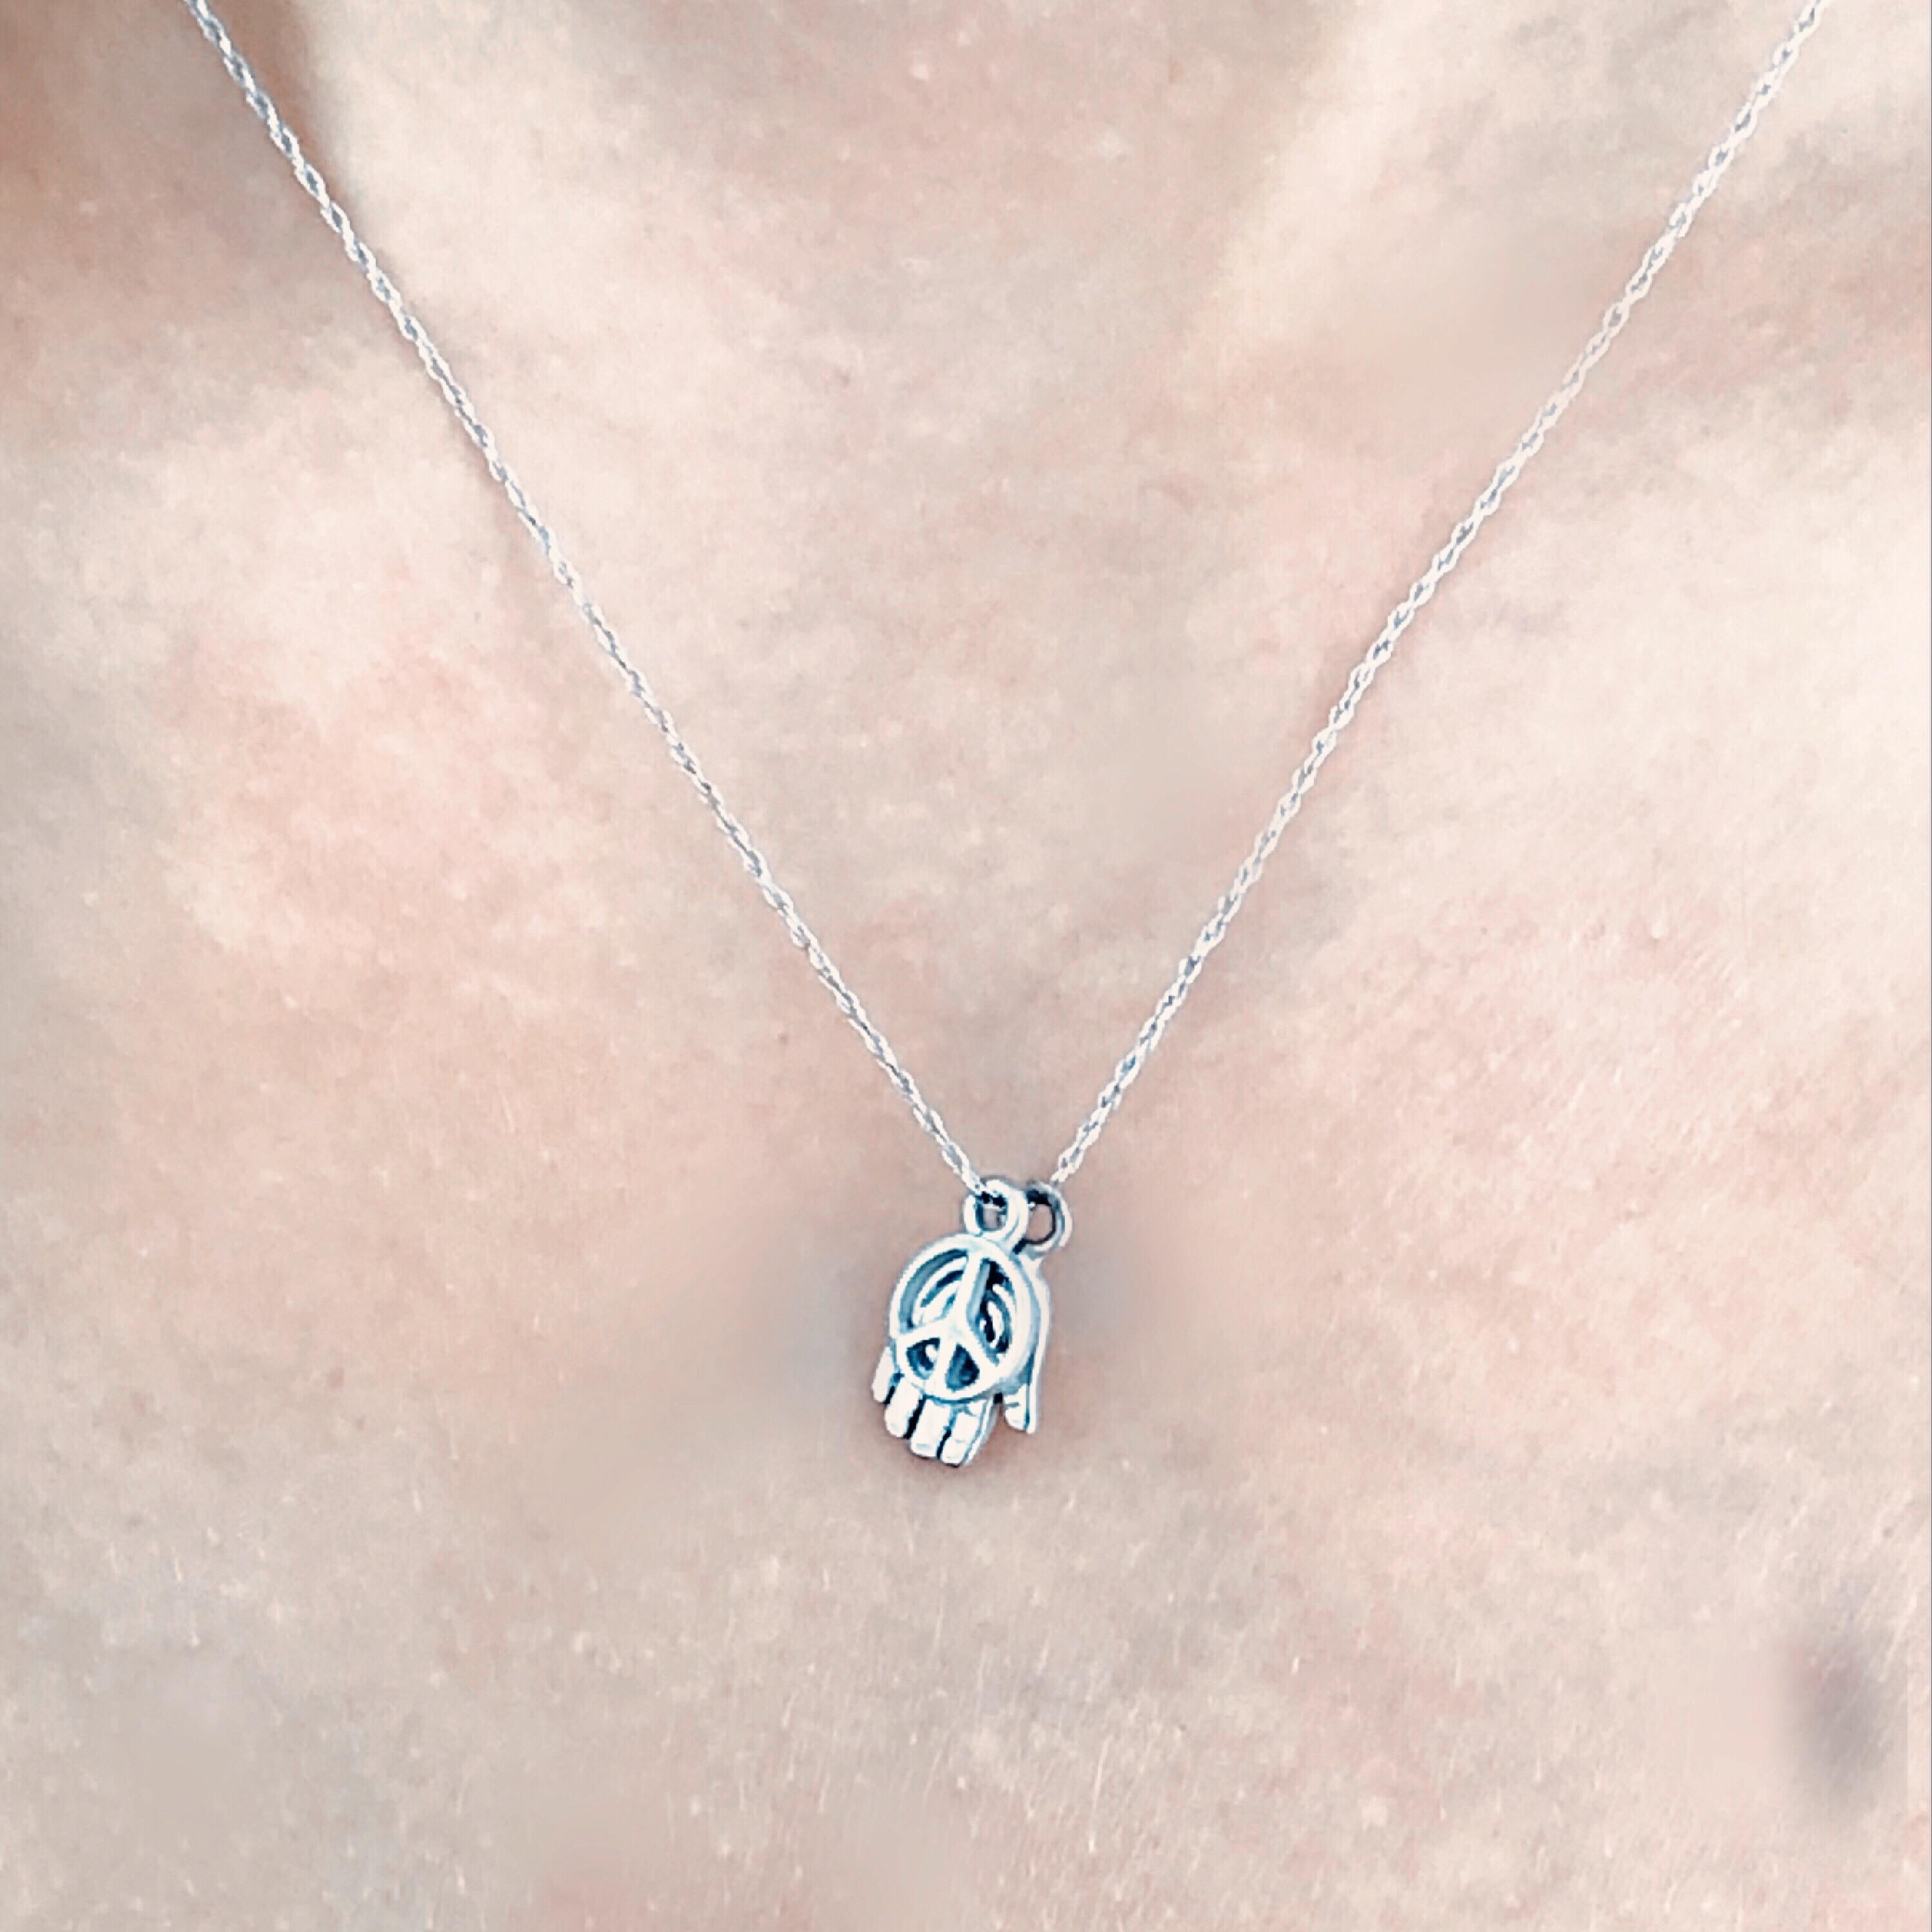 14 karat white gold necklace pendant with two charms 
Hand hamsa and peace sign charms
Chain 18